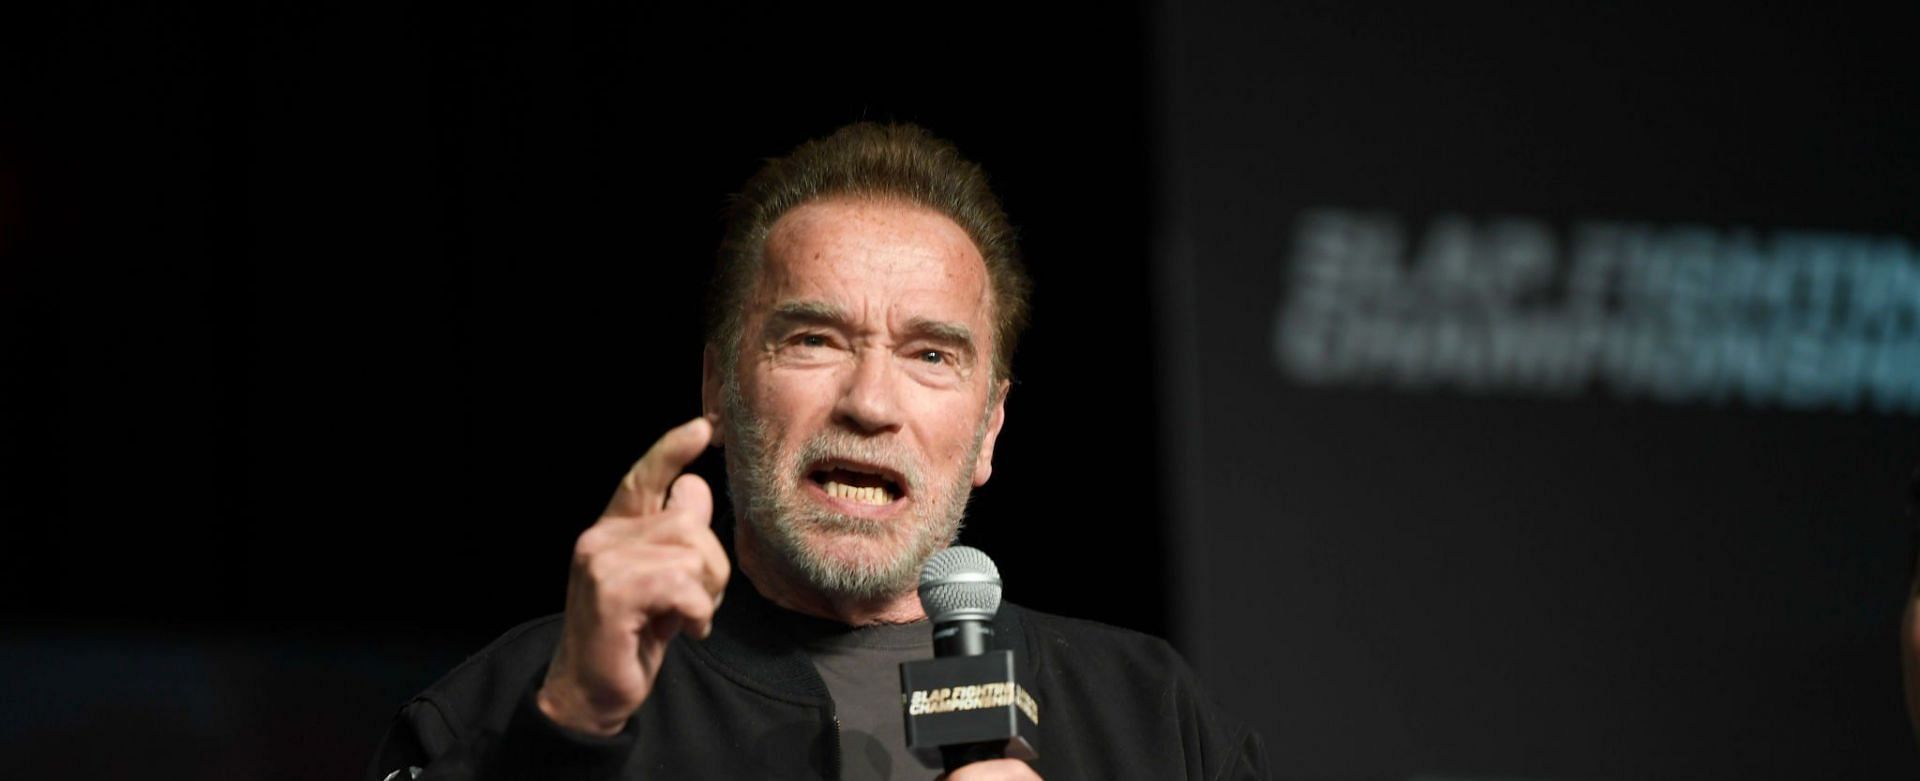 Arnold Schwarzenegger&#039;s video condemning hate and anti-Semitism won hearts across the internet (Image via Getty Images)